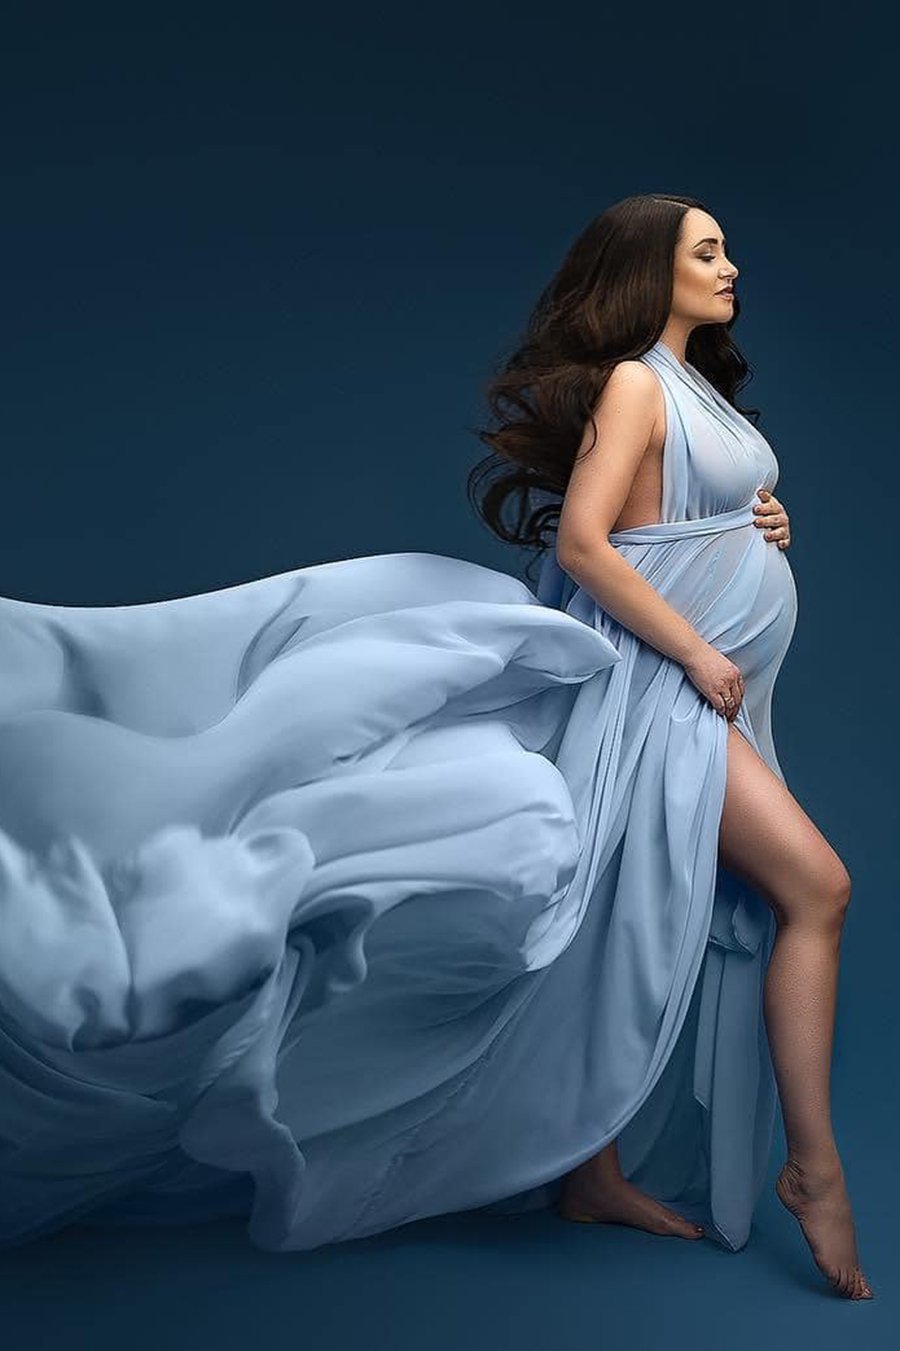 A pregnant woman is wearing a long blue dress. The dress is made from chiffon with a lot of fabric. The fabric is used to created waves behind her